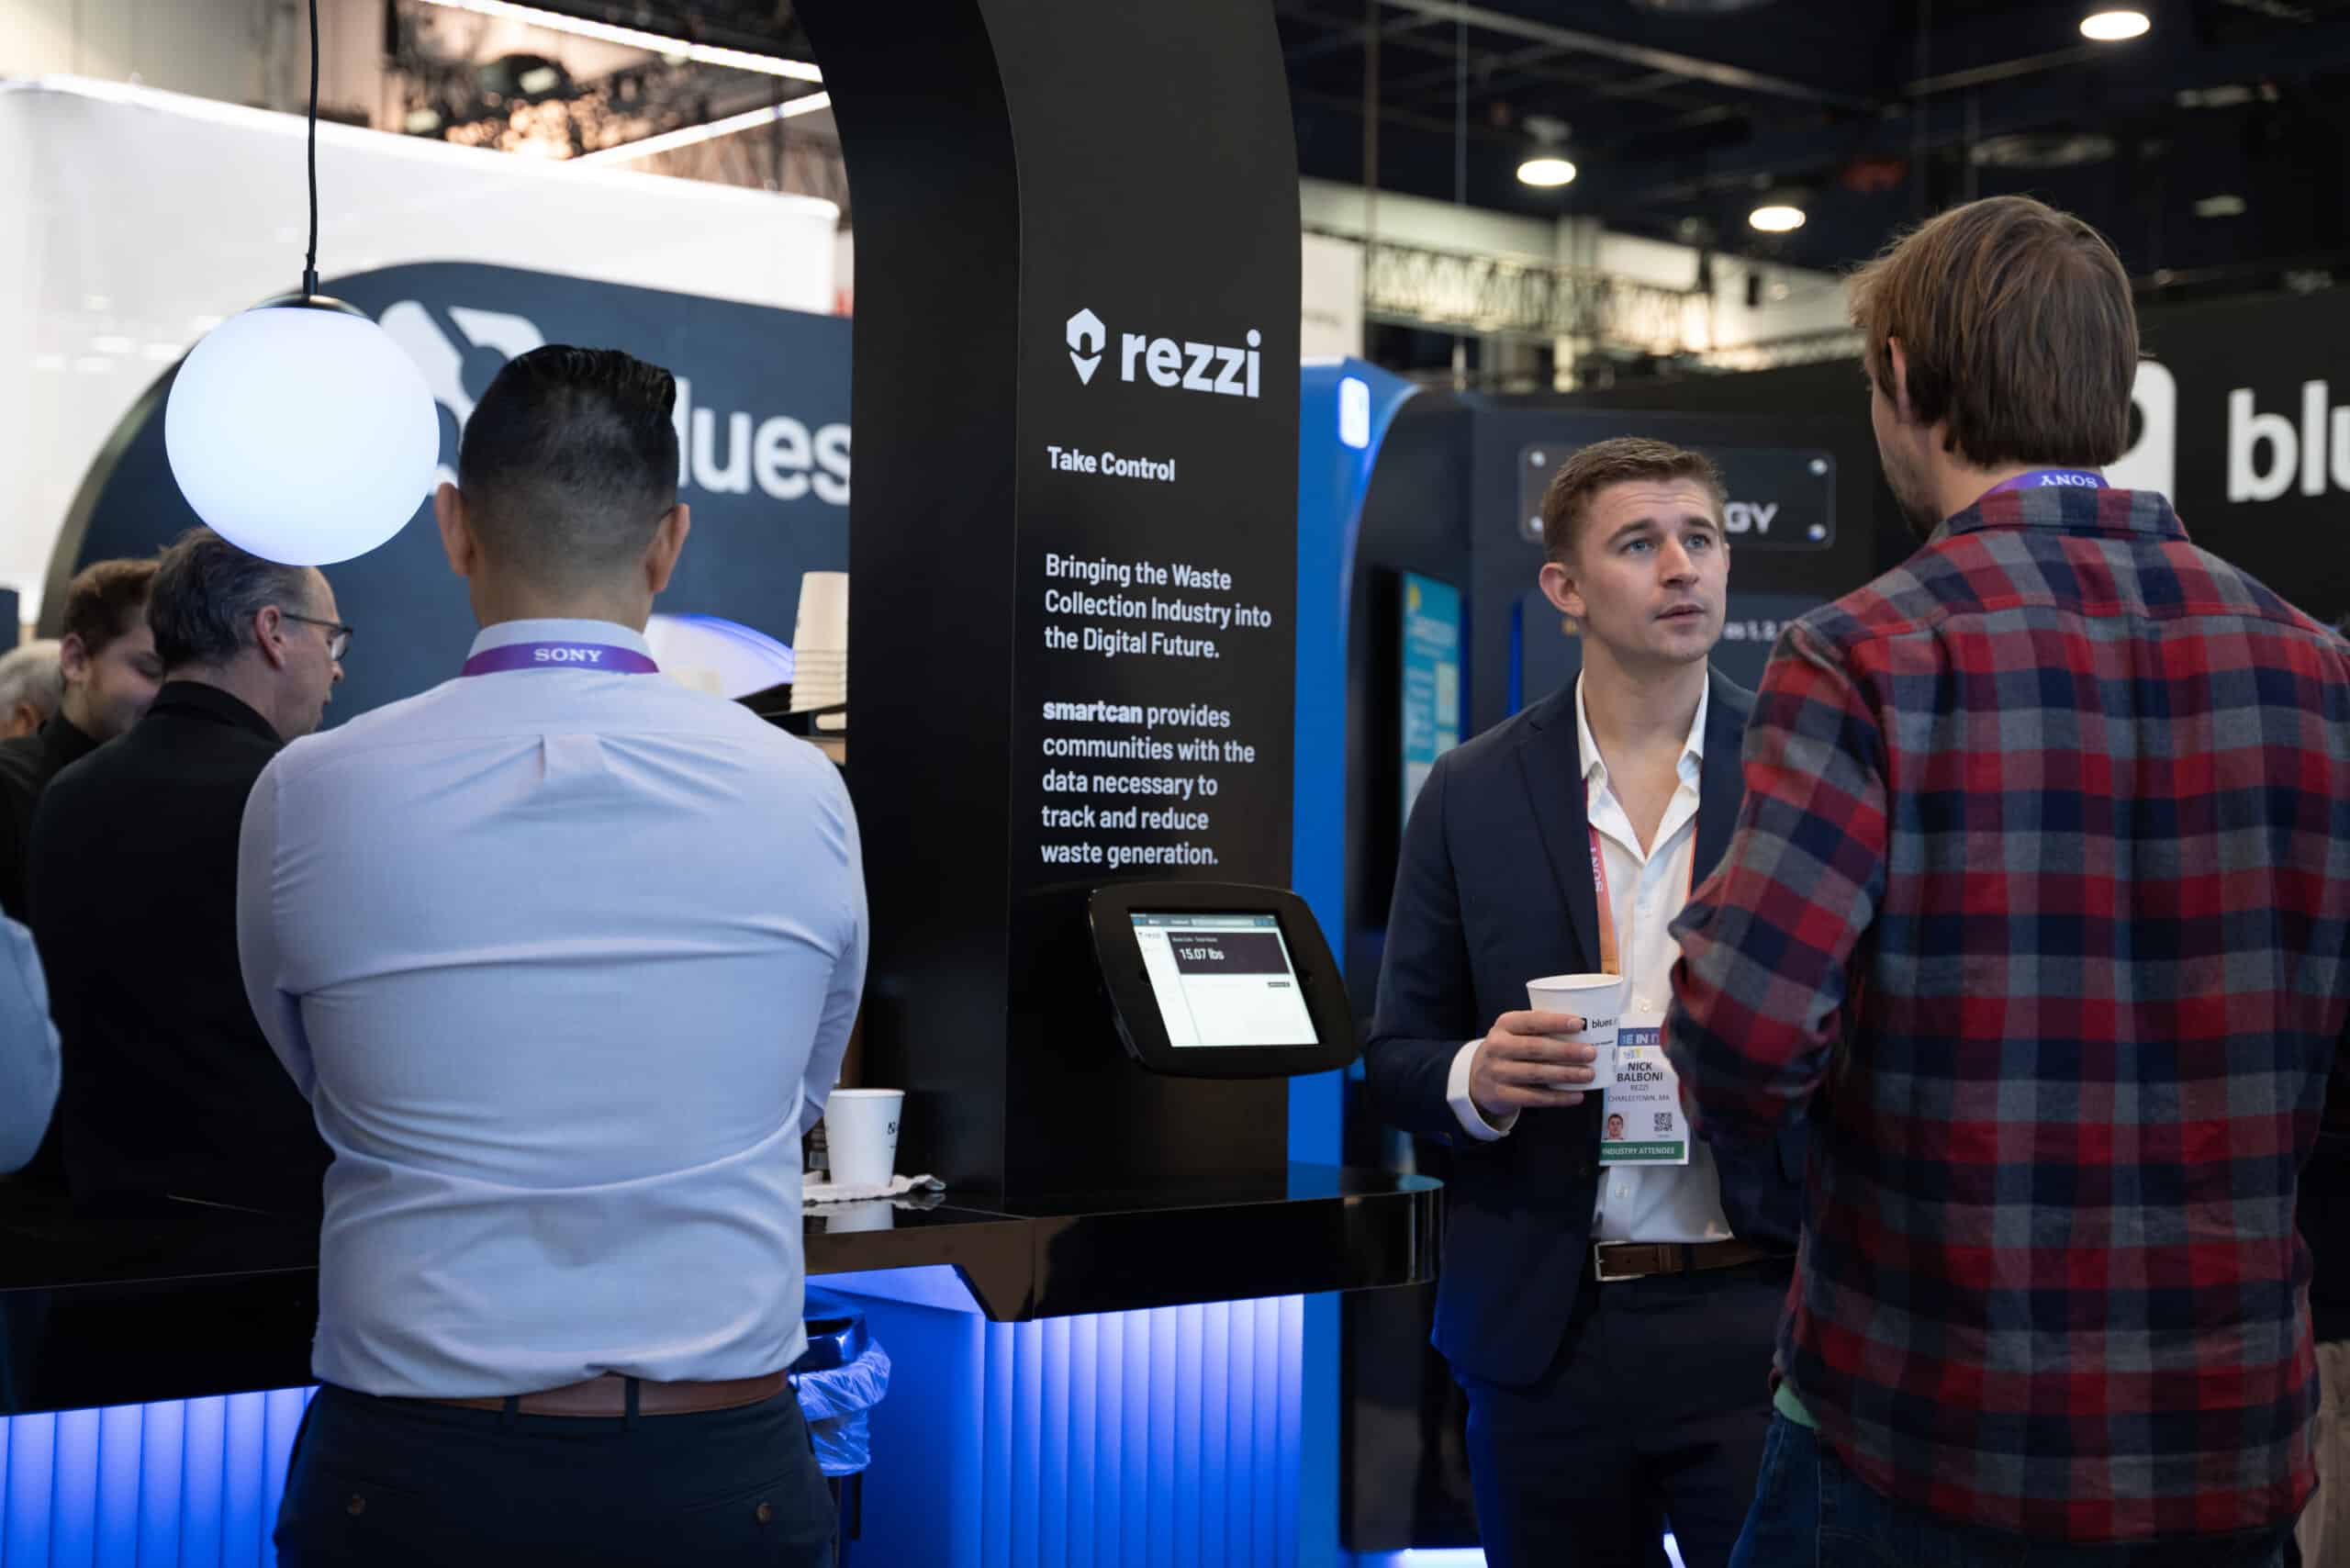 Rezzi displaying their SmartCan technology with Blues at CES 2023.